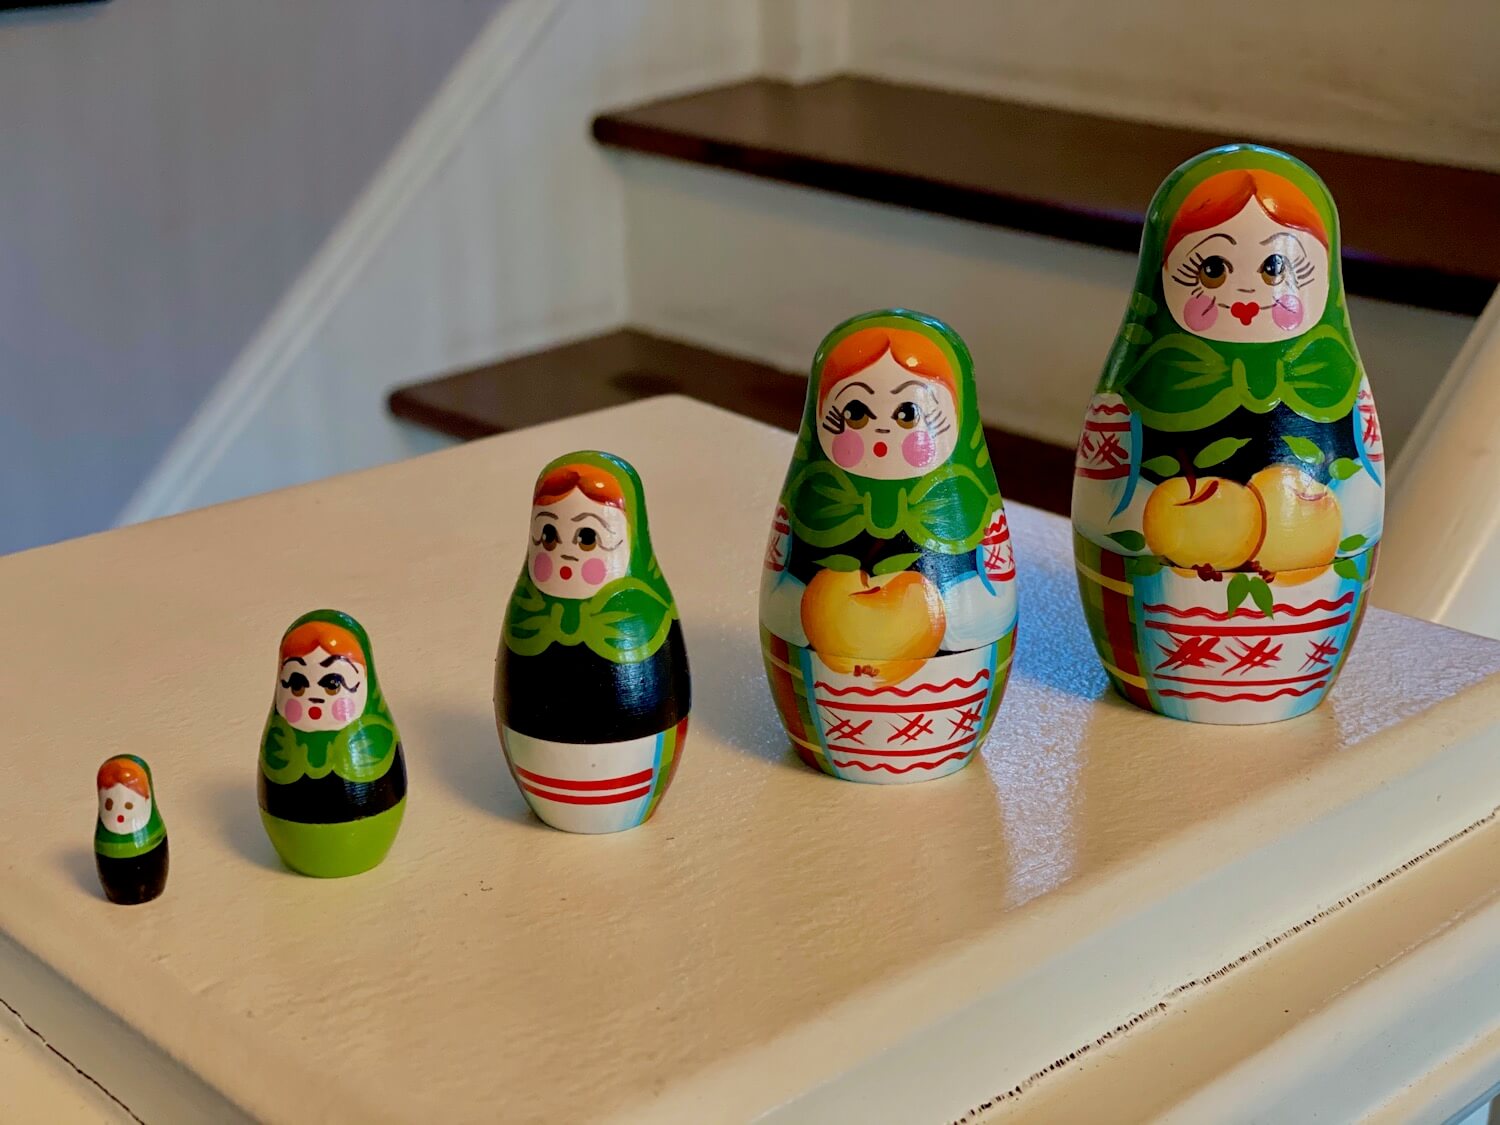 A set of five Russian style dolls purchased in Minsk, Belarus. Each doll gets progressively smaller. They are all depicting the same women wearing a green scarf, blond hair, black shirt while holding apples.